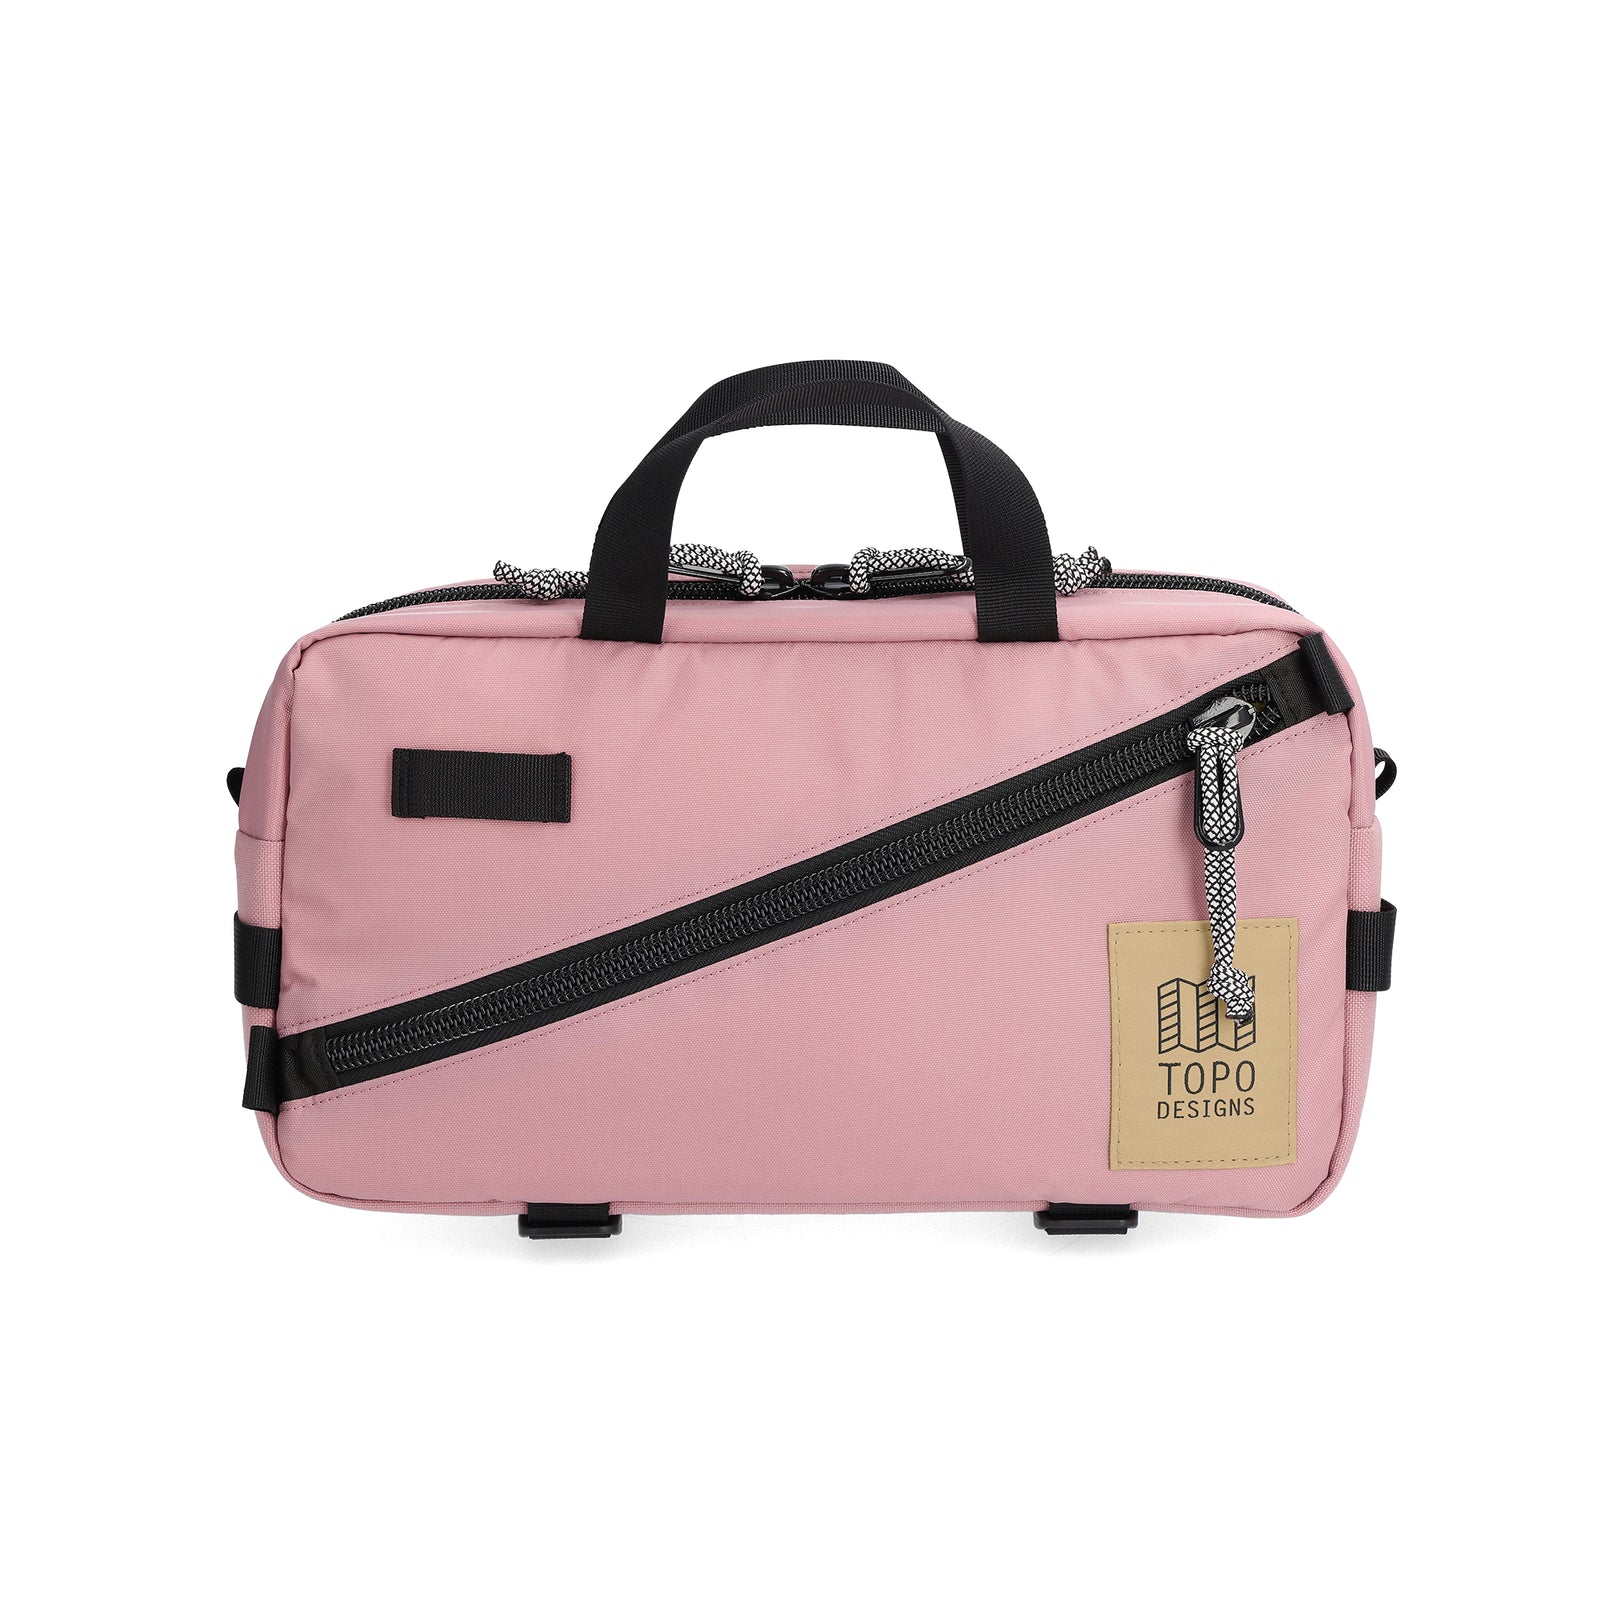 Front View of Topo Designs Quick Pack  in "Rose"